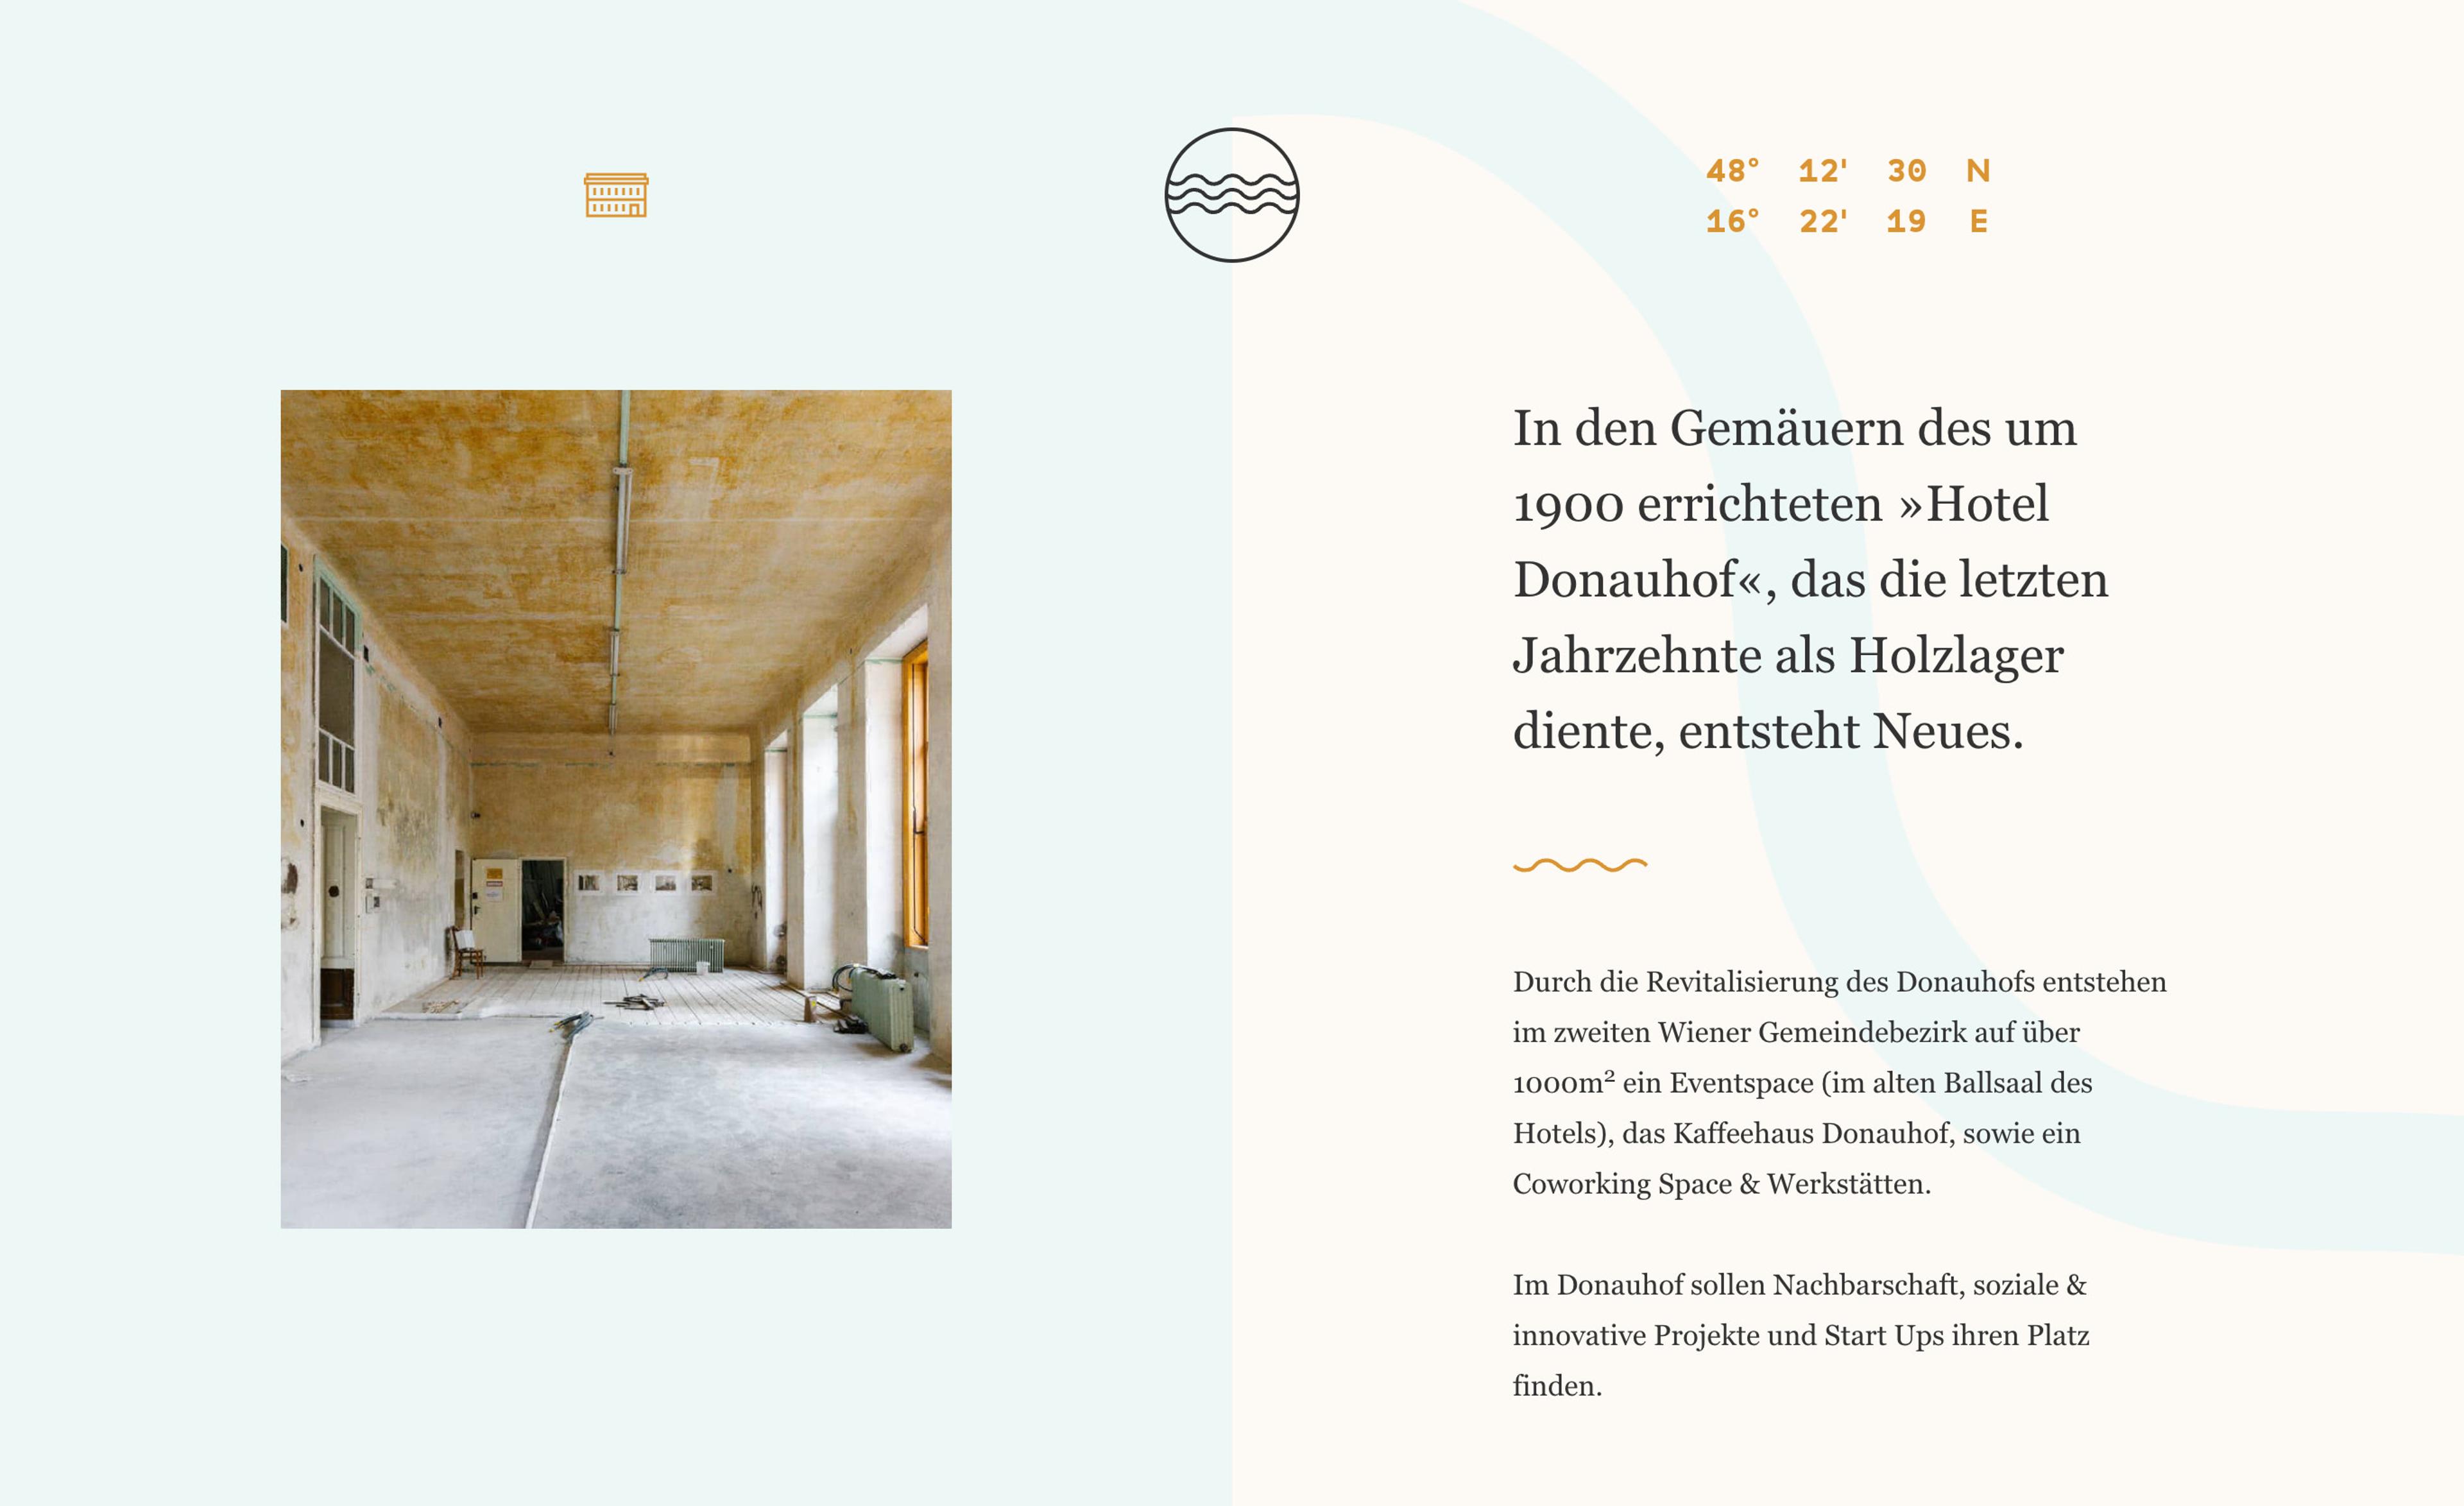 "Landing page for Donauhof Wien, displaying some text about historic facts of the building and a photo of a renovated hall."